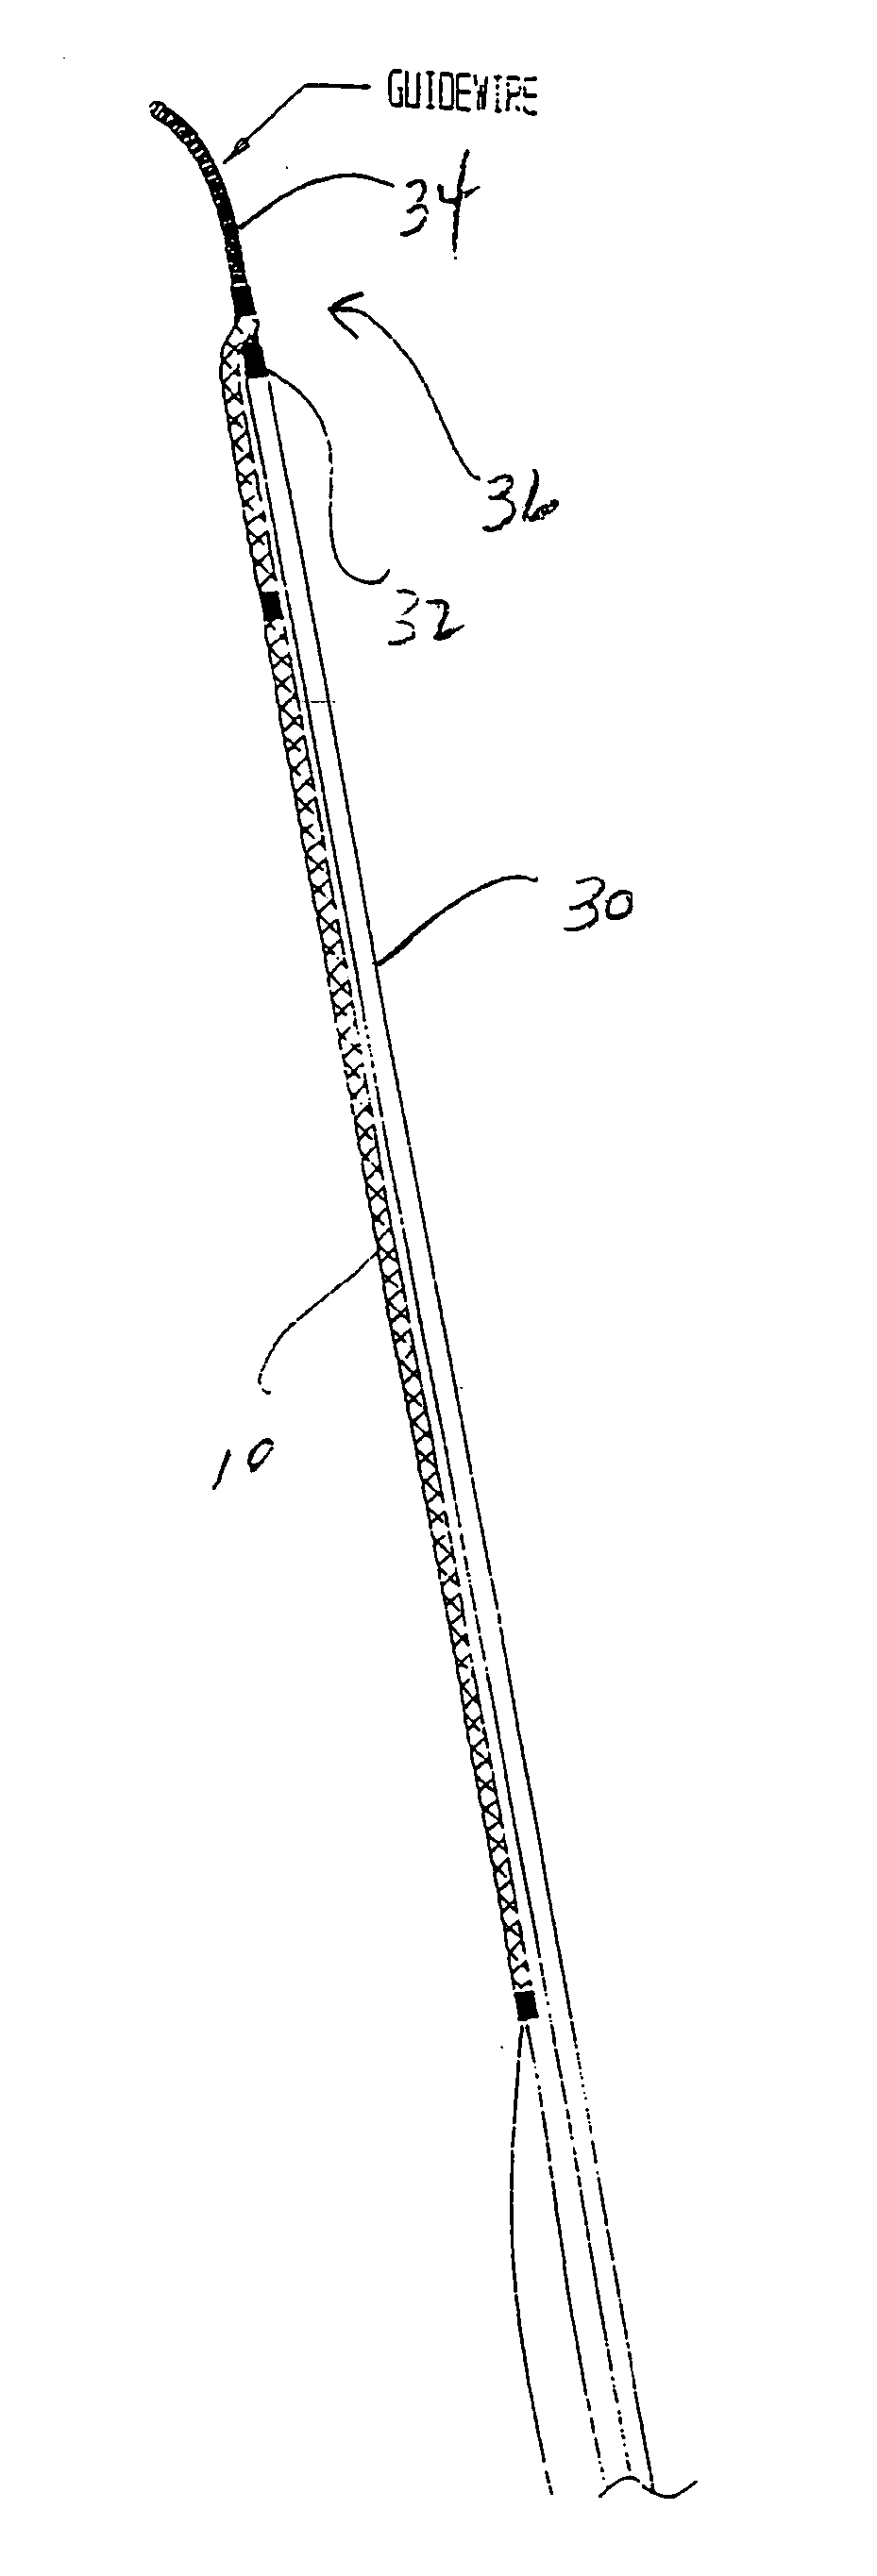 Stent delivery system and method